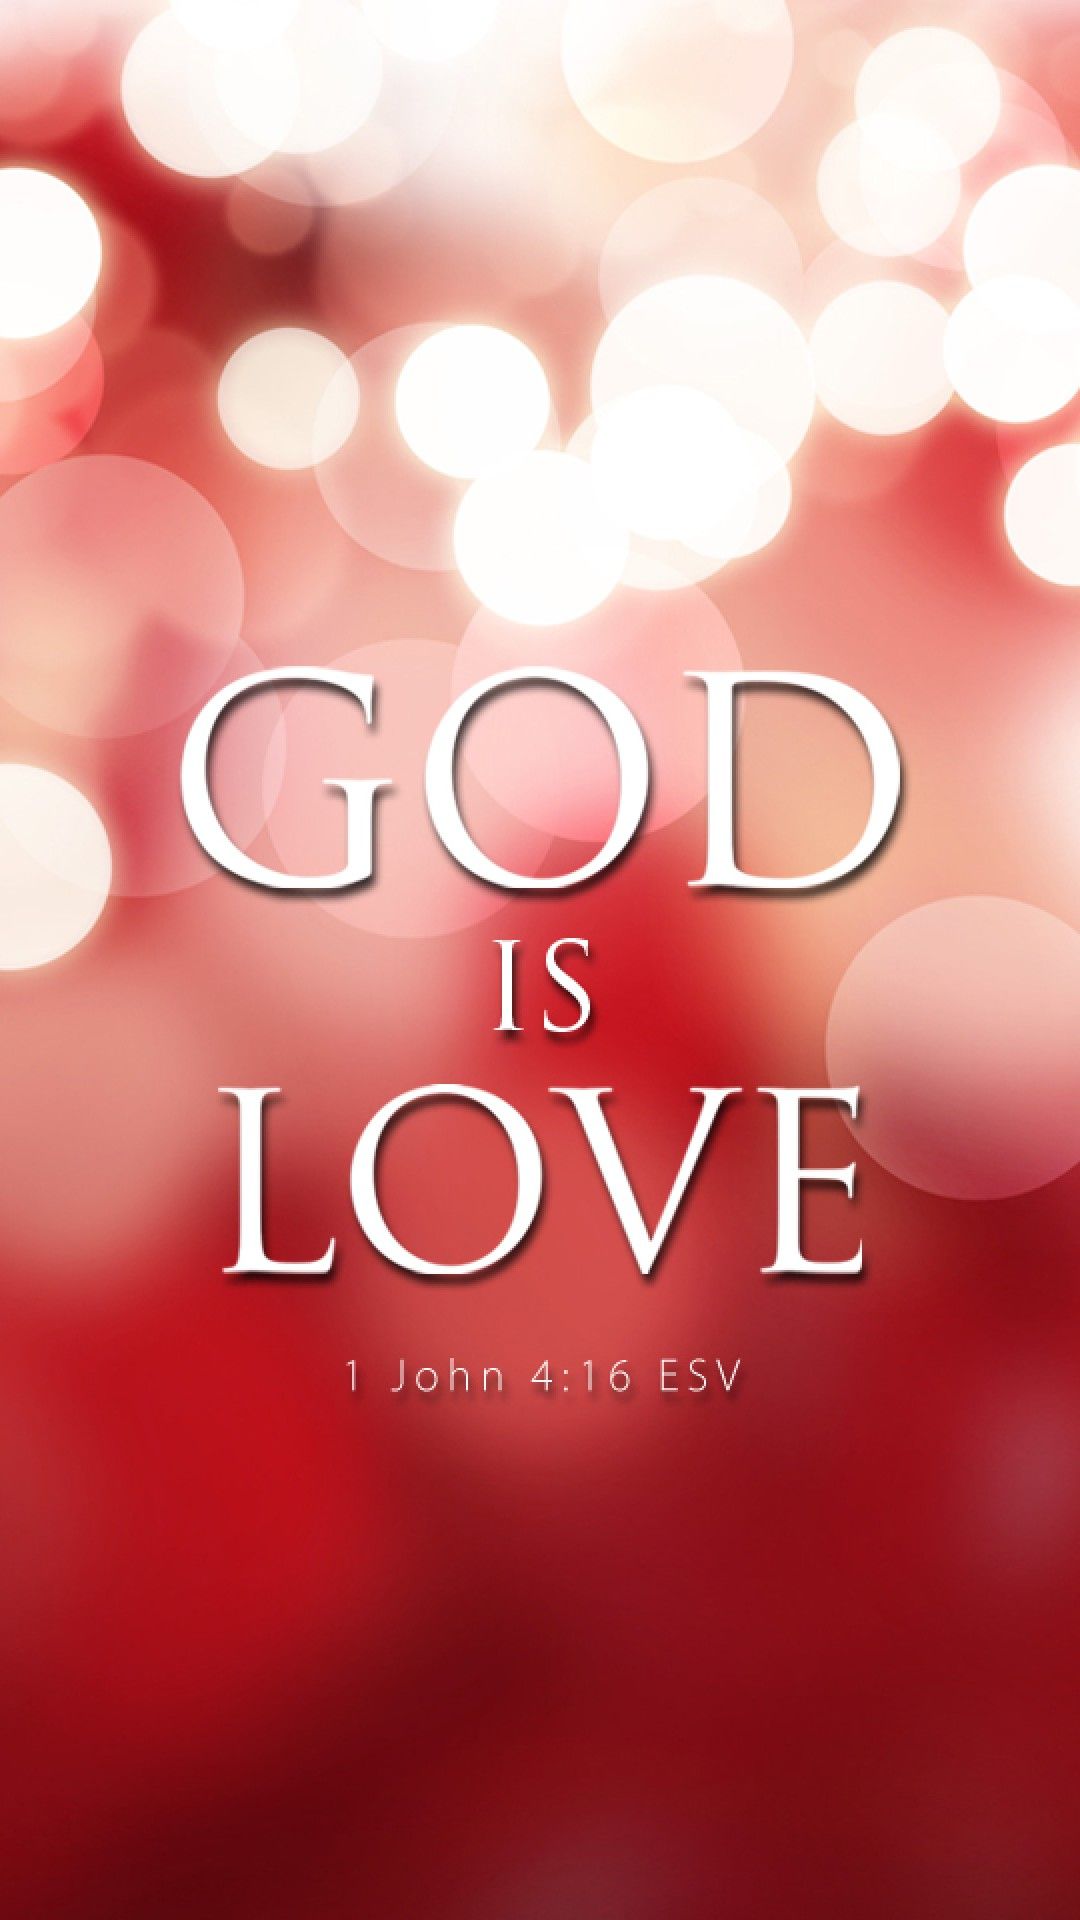 God is love   Butterfly wallpaper iphone Iphone wallpaper pattern  Christian iphone wallpaper